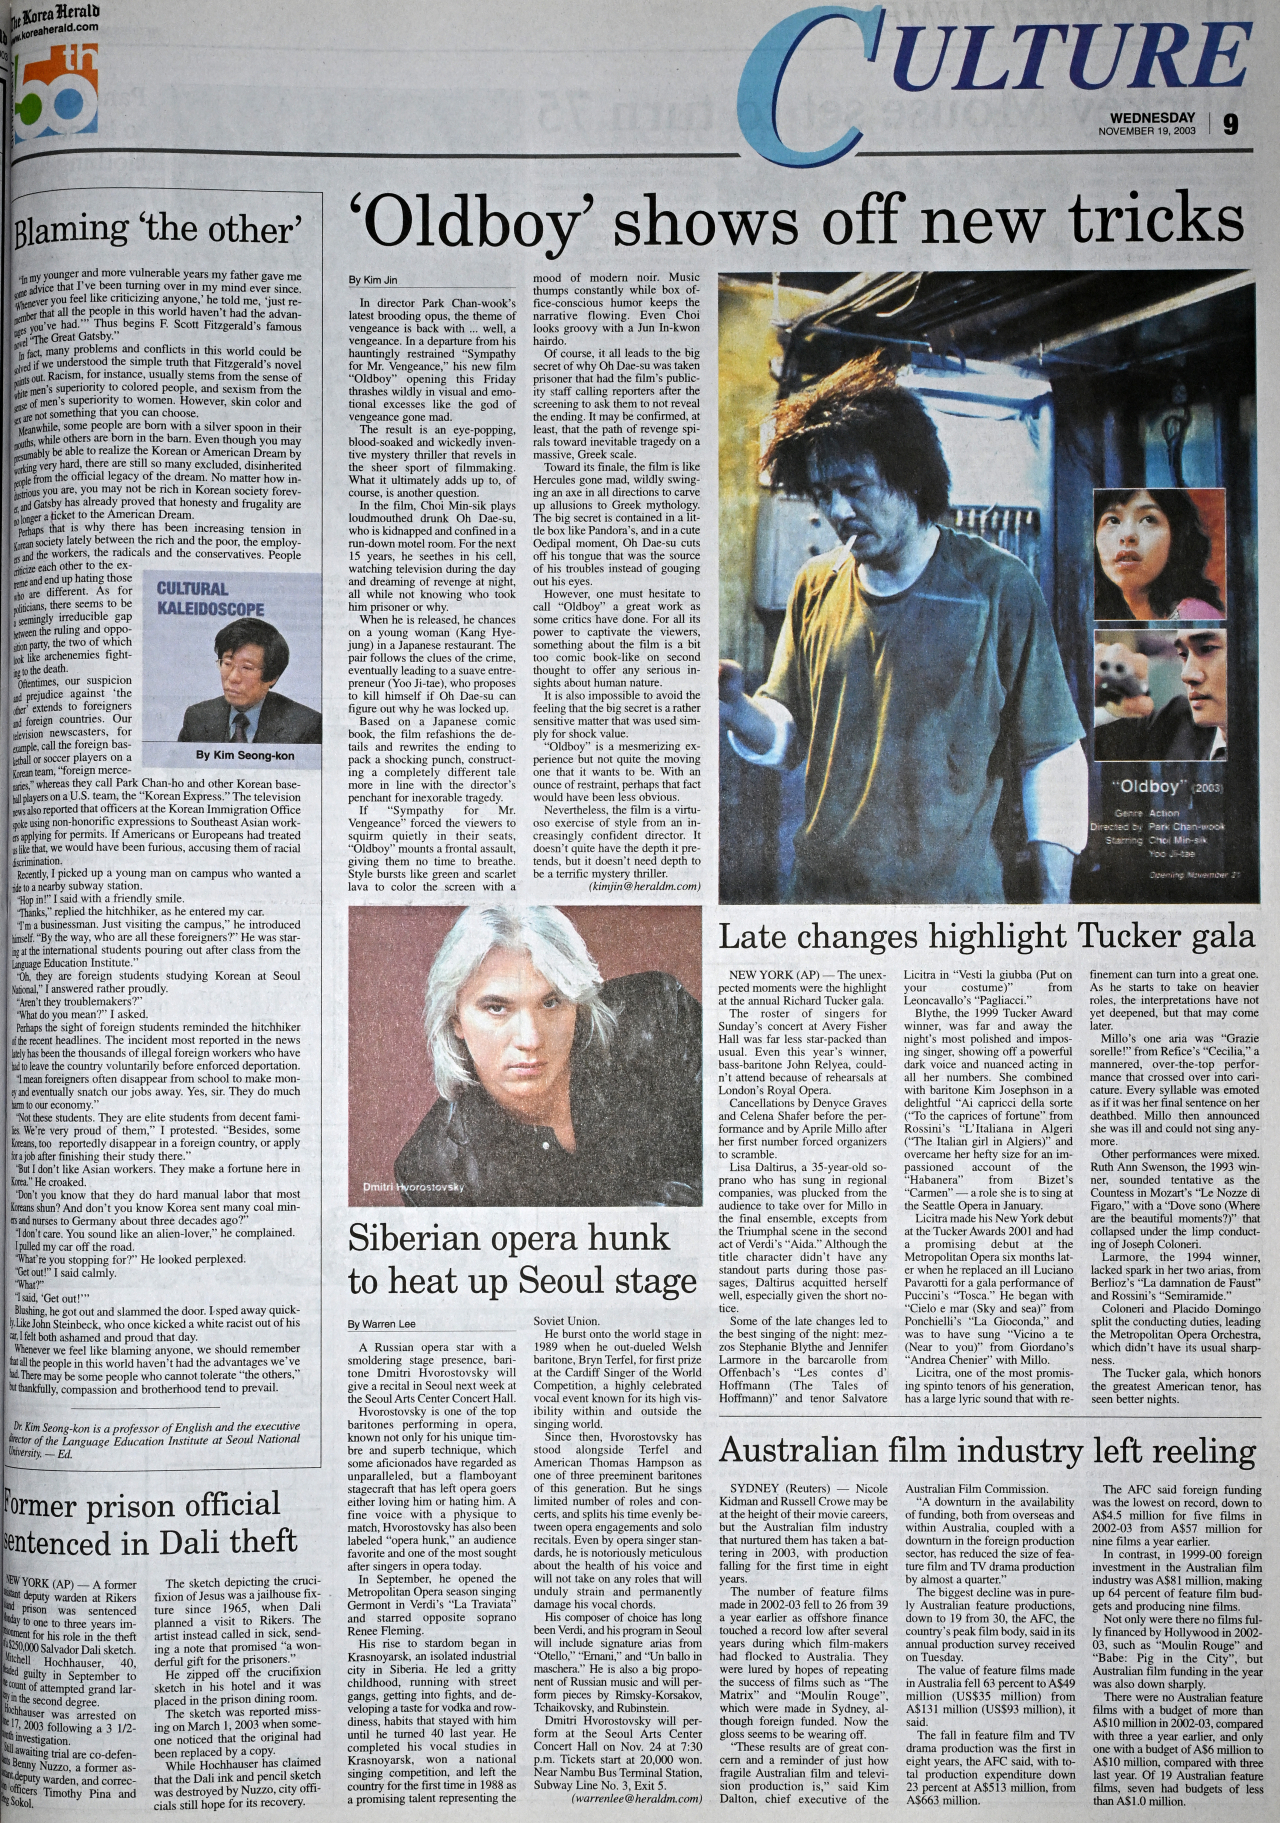 The culture page of the Nov.19, 2003 edition of The Korea Herald (The Korea Herald)